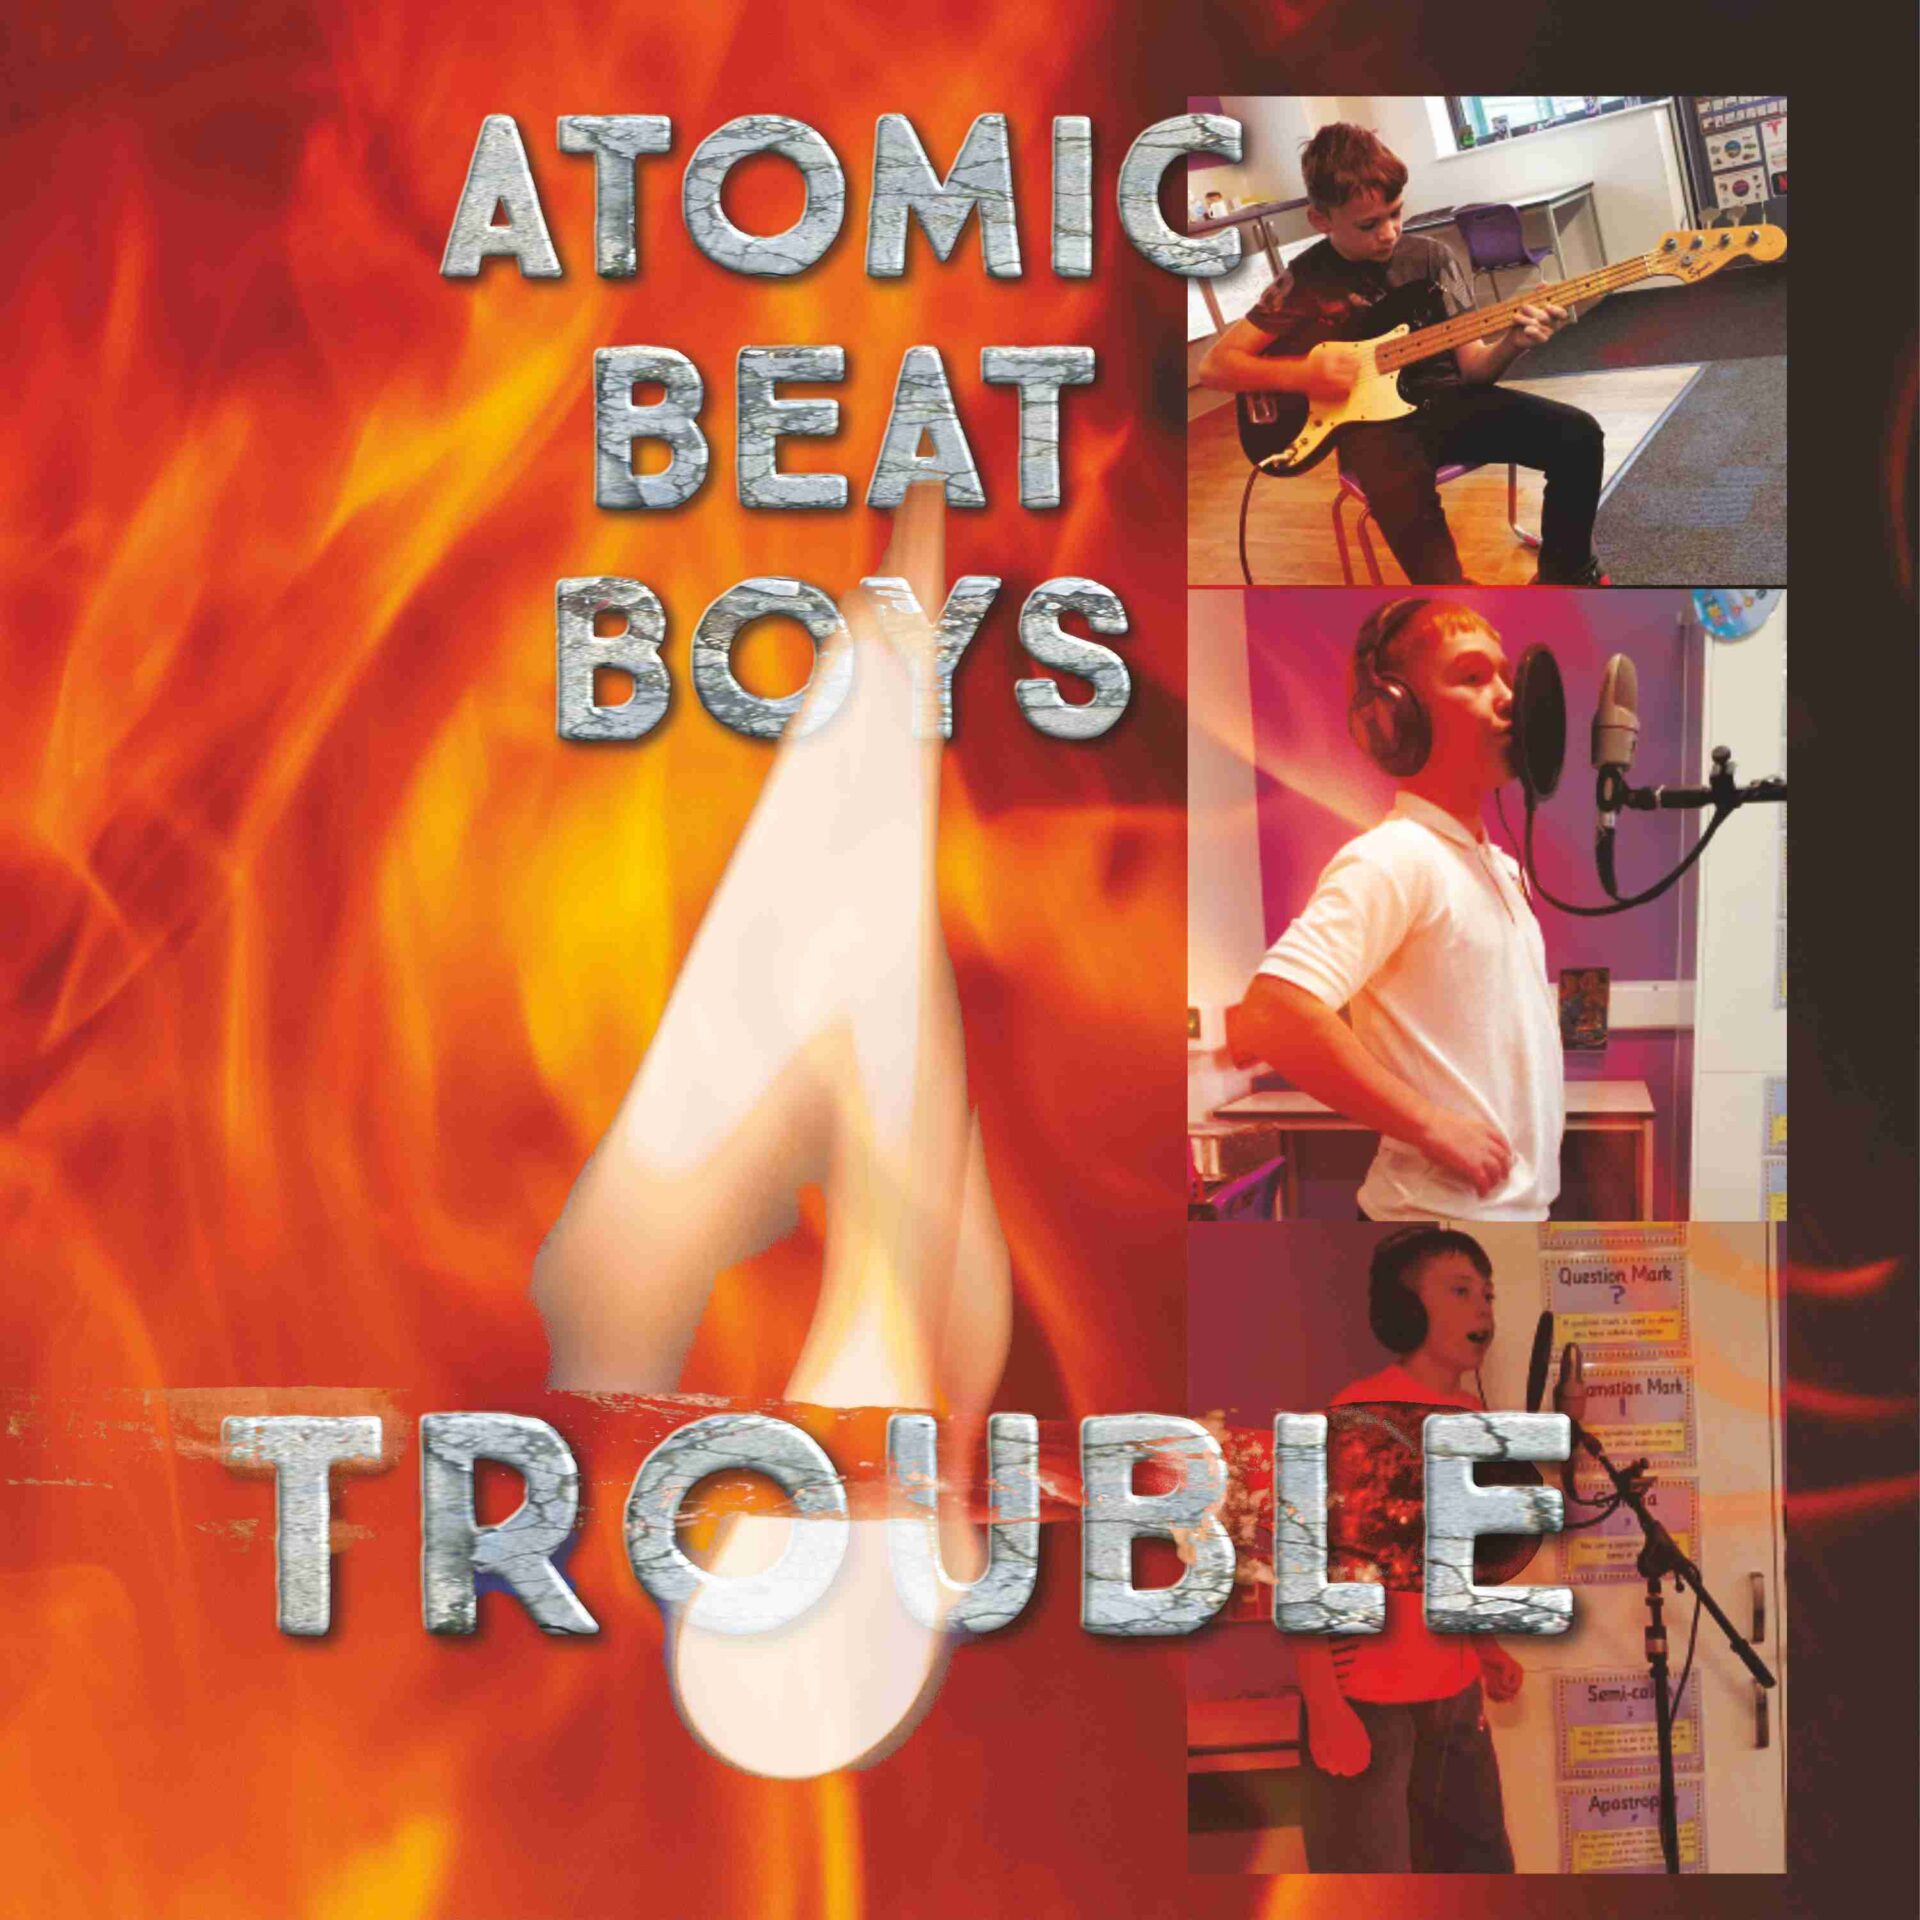 Swansea's Atomic Beat Boys cover Shampoo's 'Trouble' in aid of War Child 1